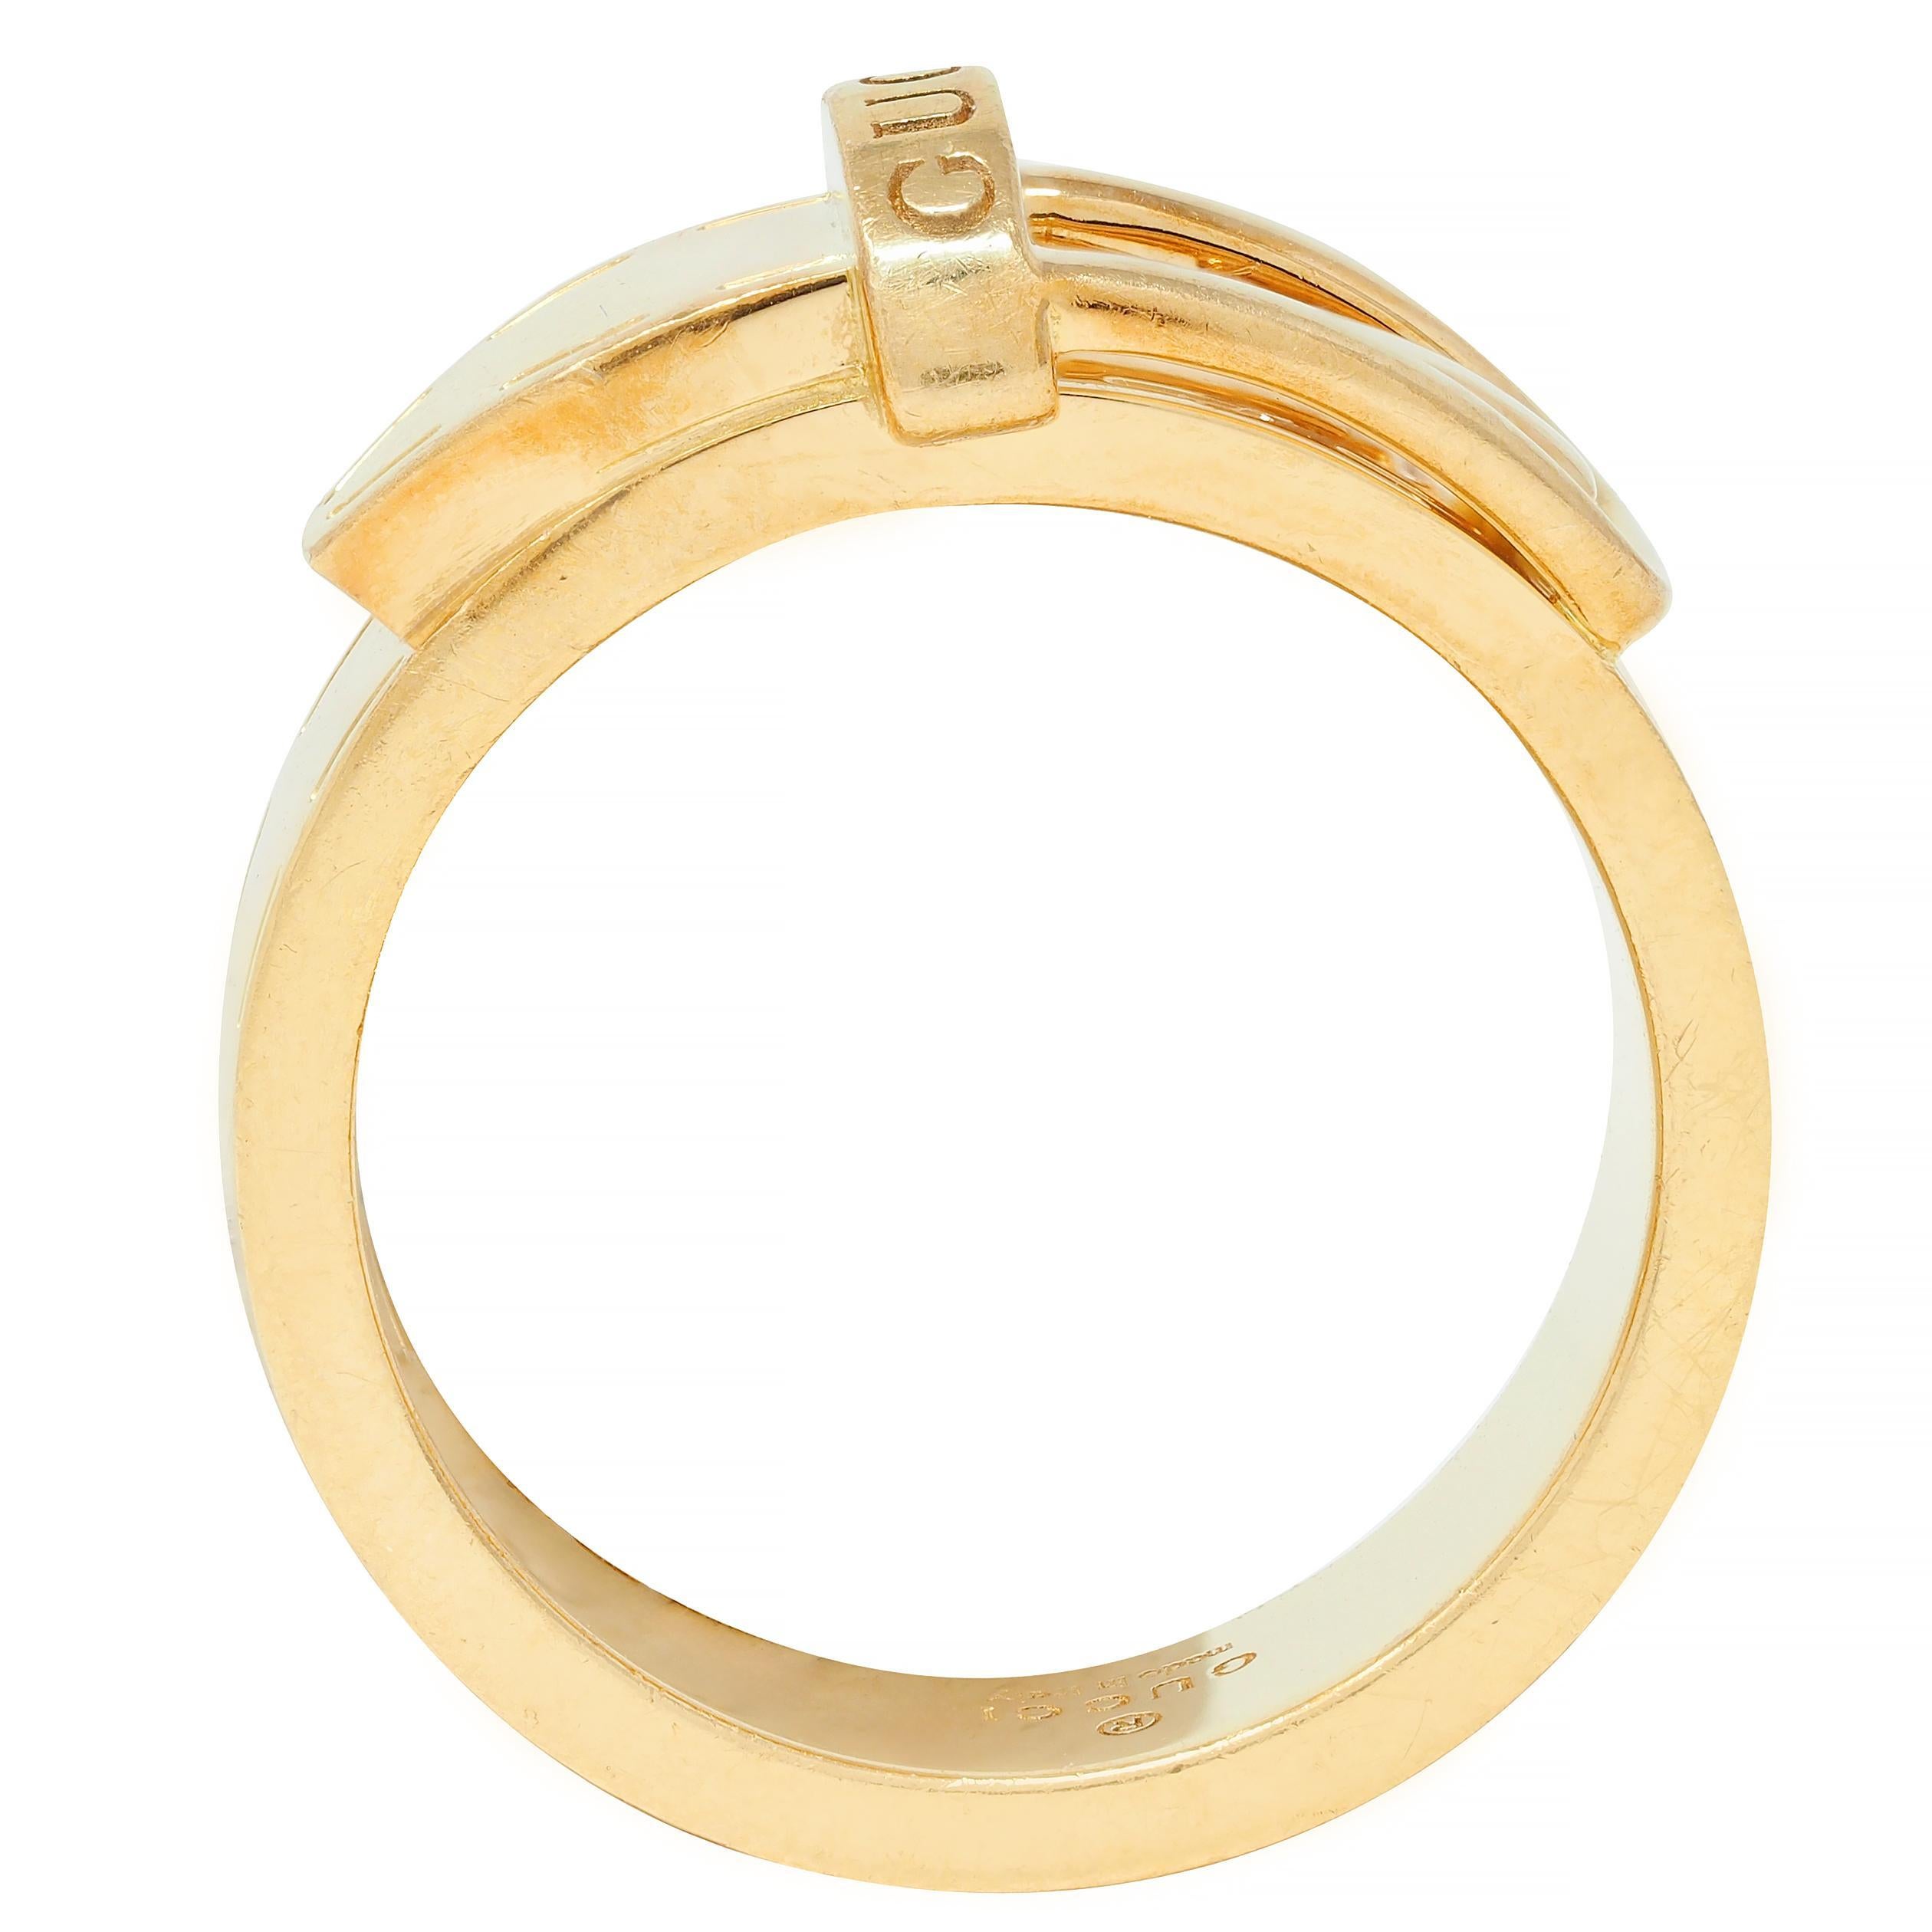 Gucci Contemporary 18 Karat Yellow Gold Belt Buckle Band Ring For Sale 3